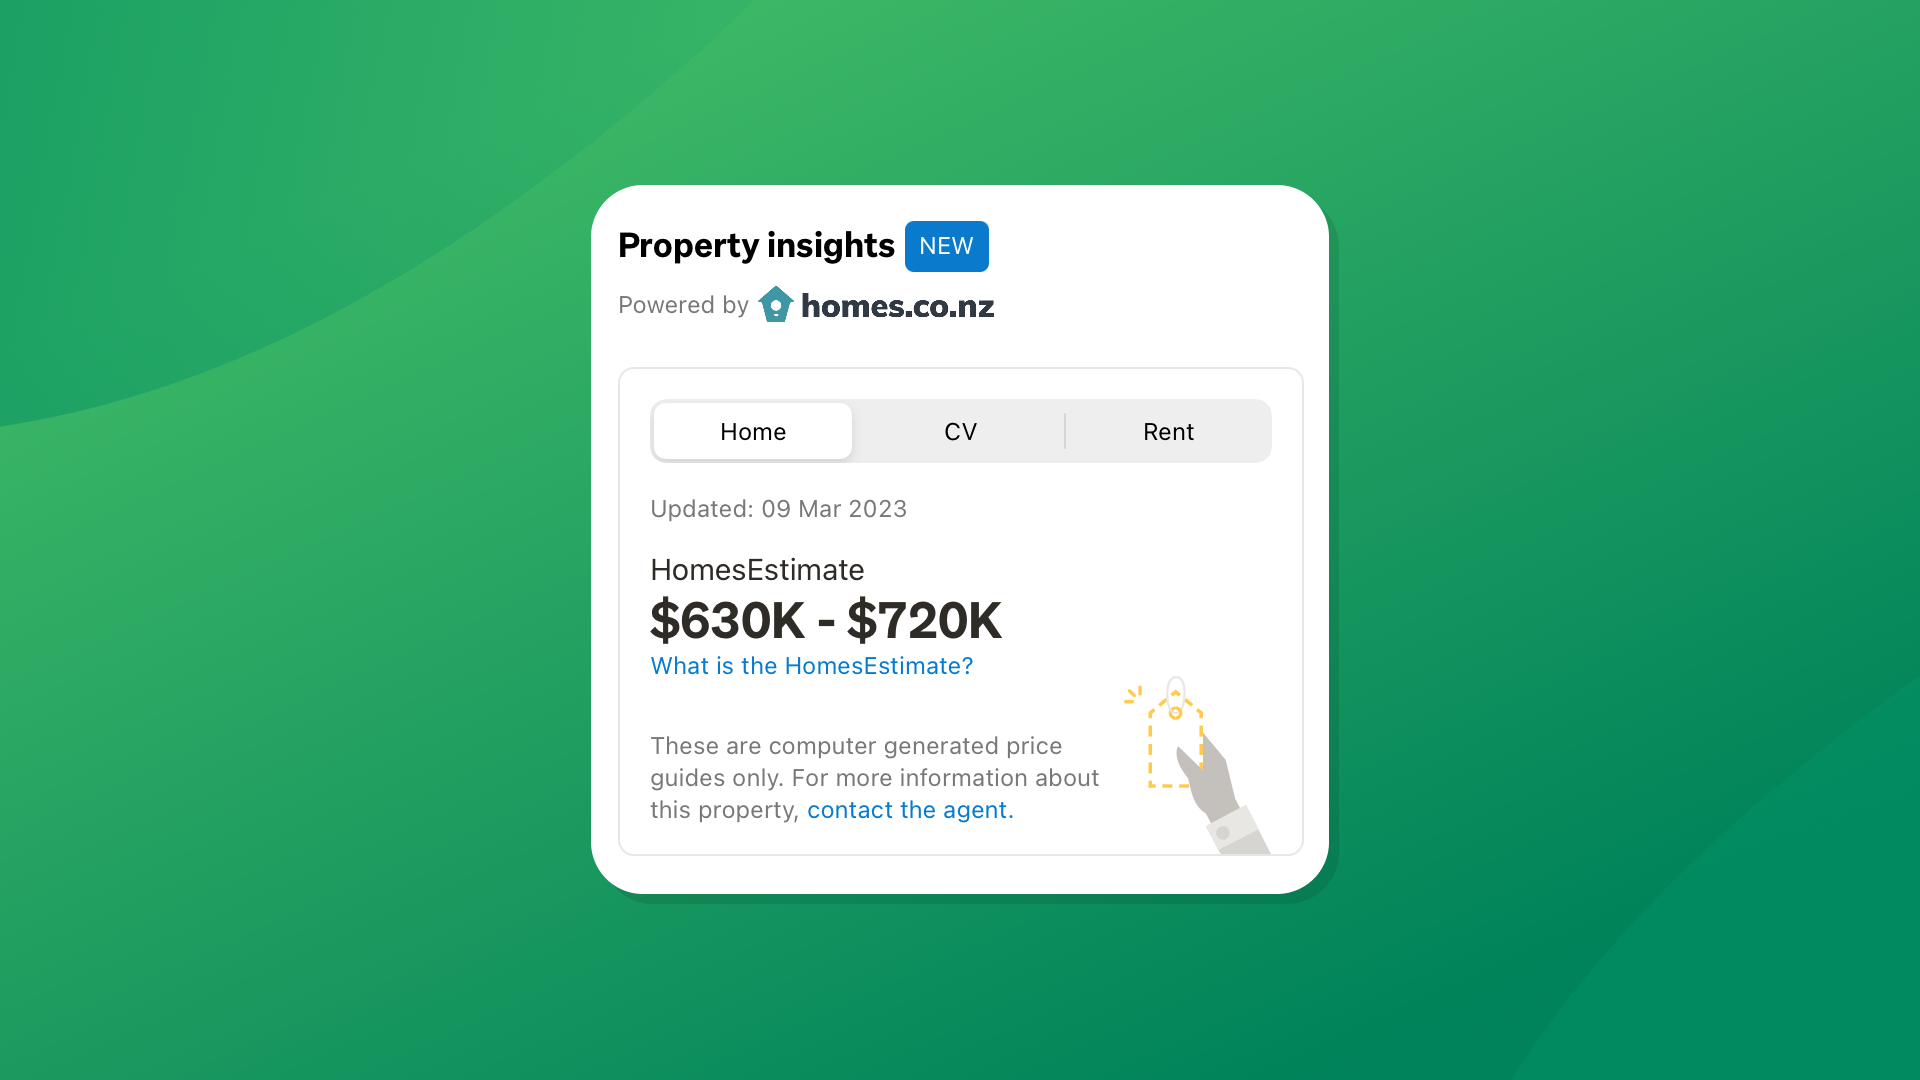 Image showing property insights tool on Trade Me